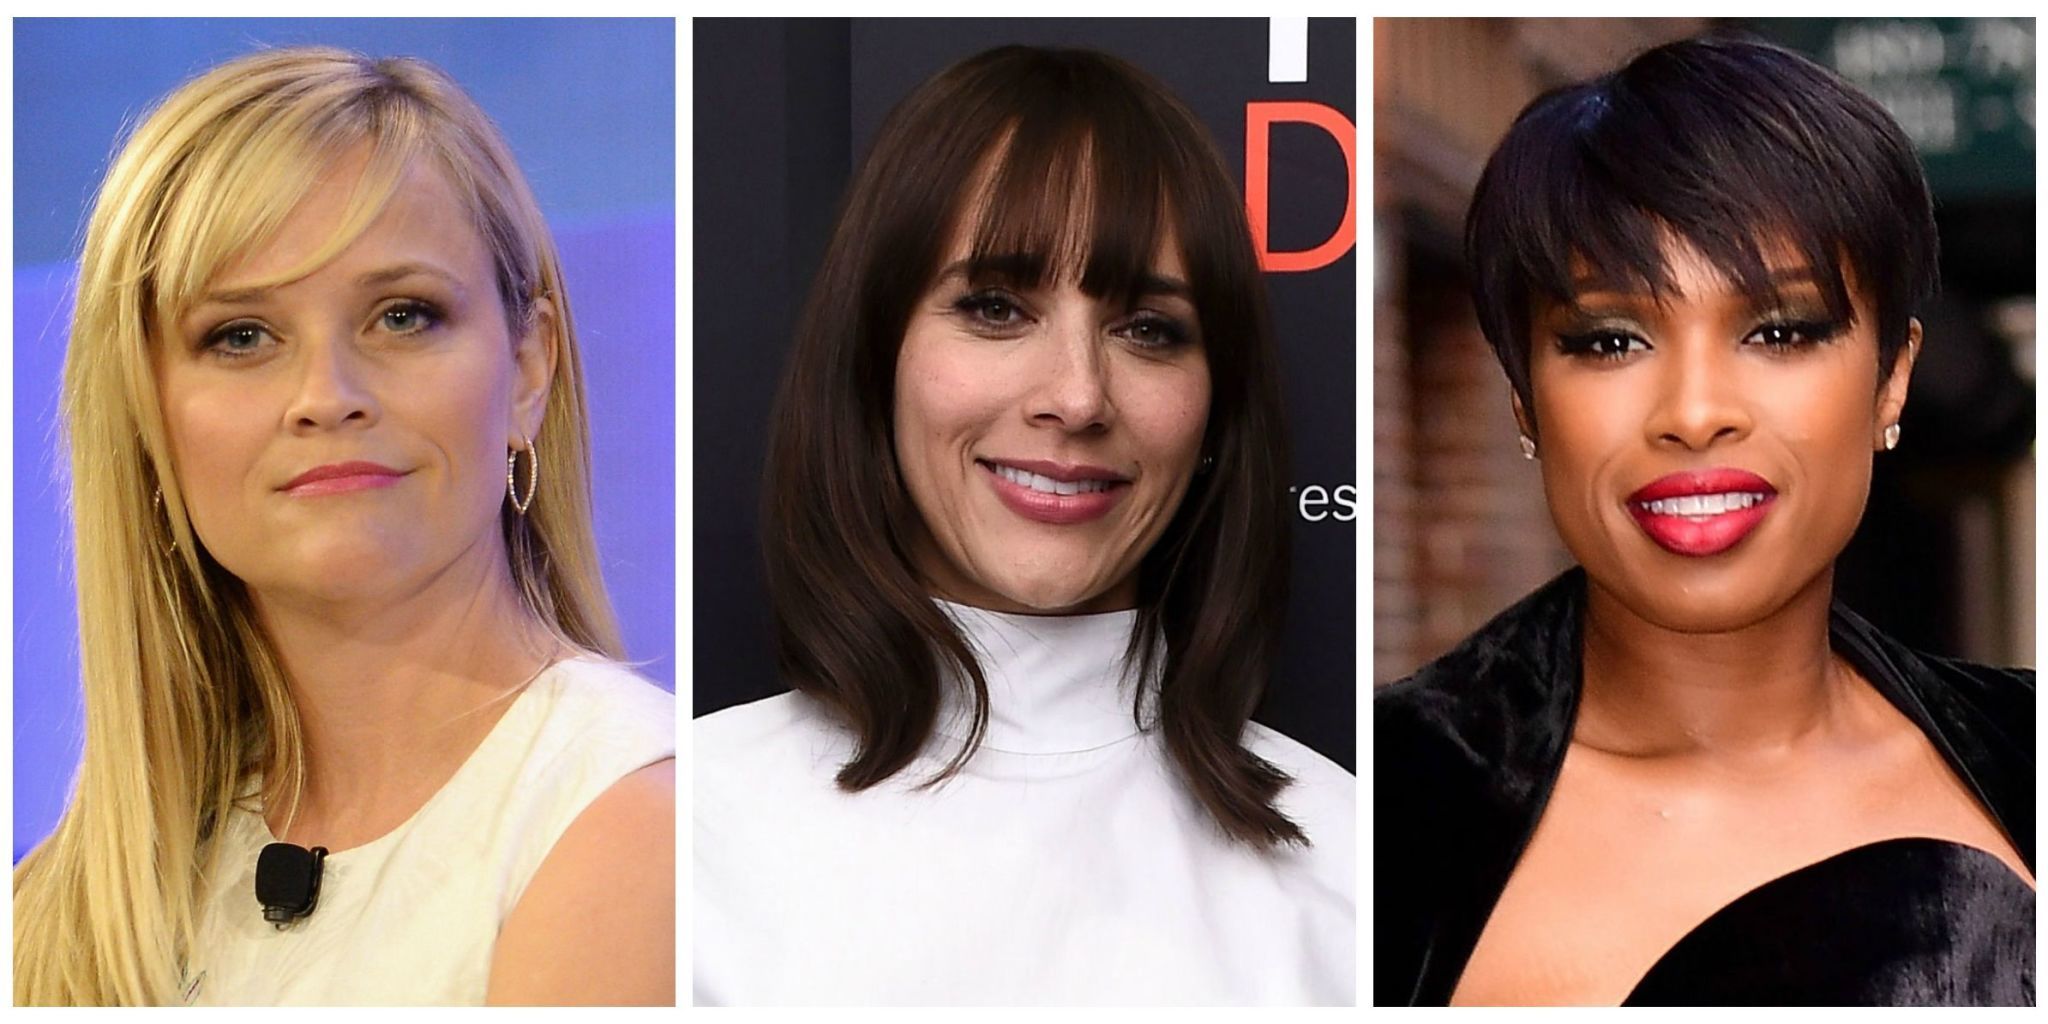 25 Types of Bangs for All Hair Textures and Lengths in 2021